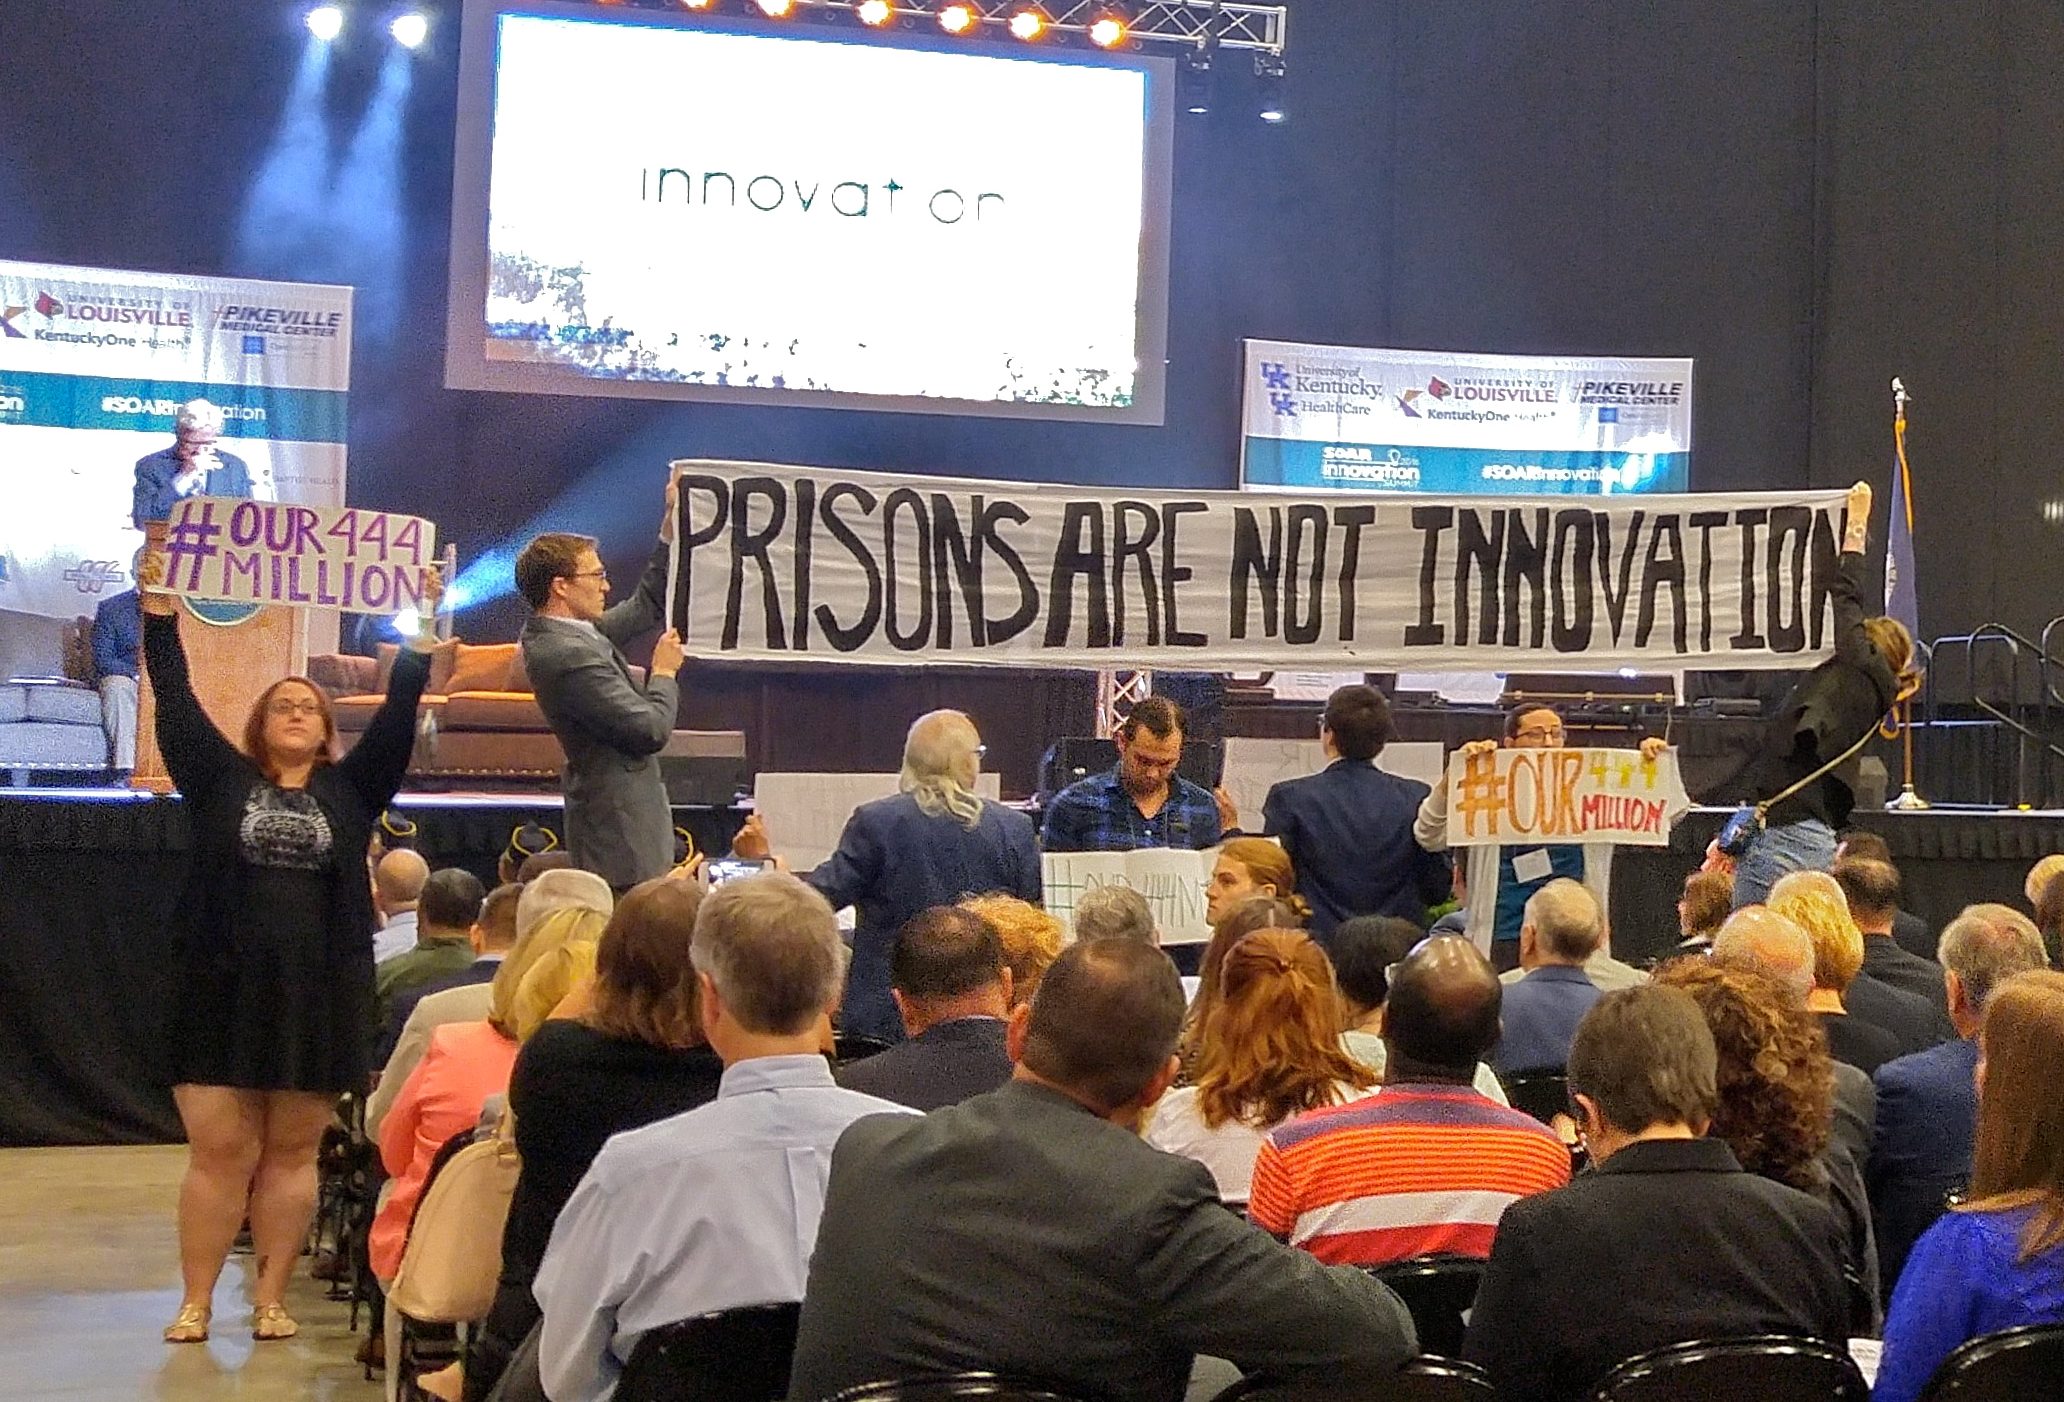 Tarence Ray holds up the left side of a banner protesting plans to build a new prison.